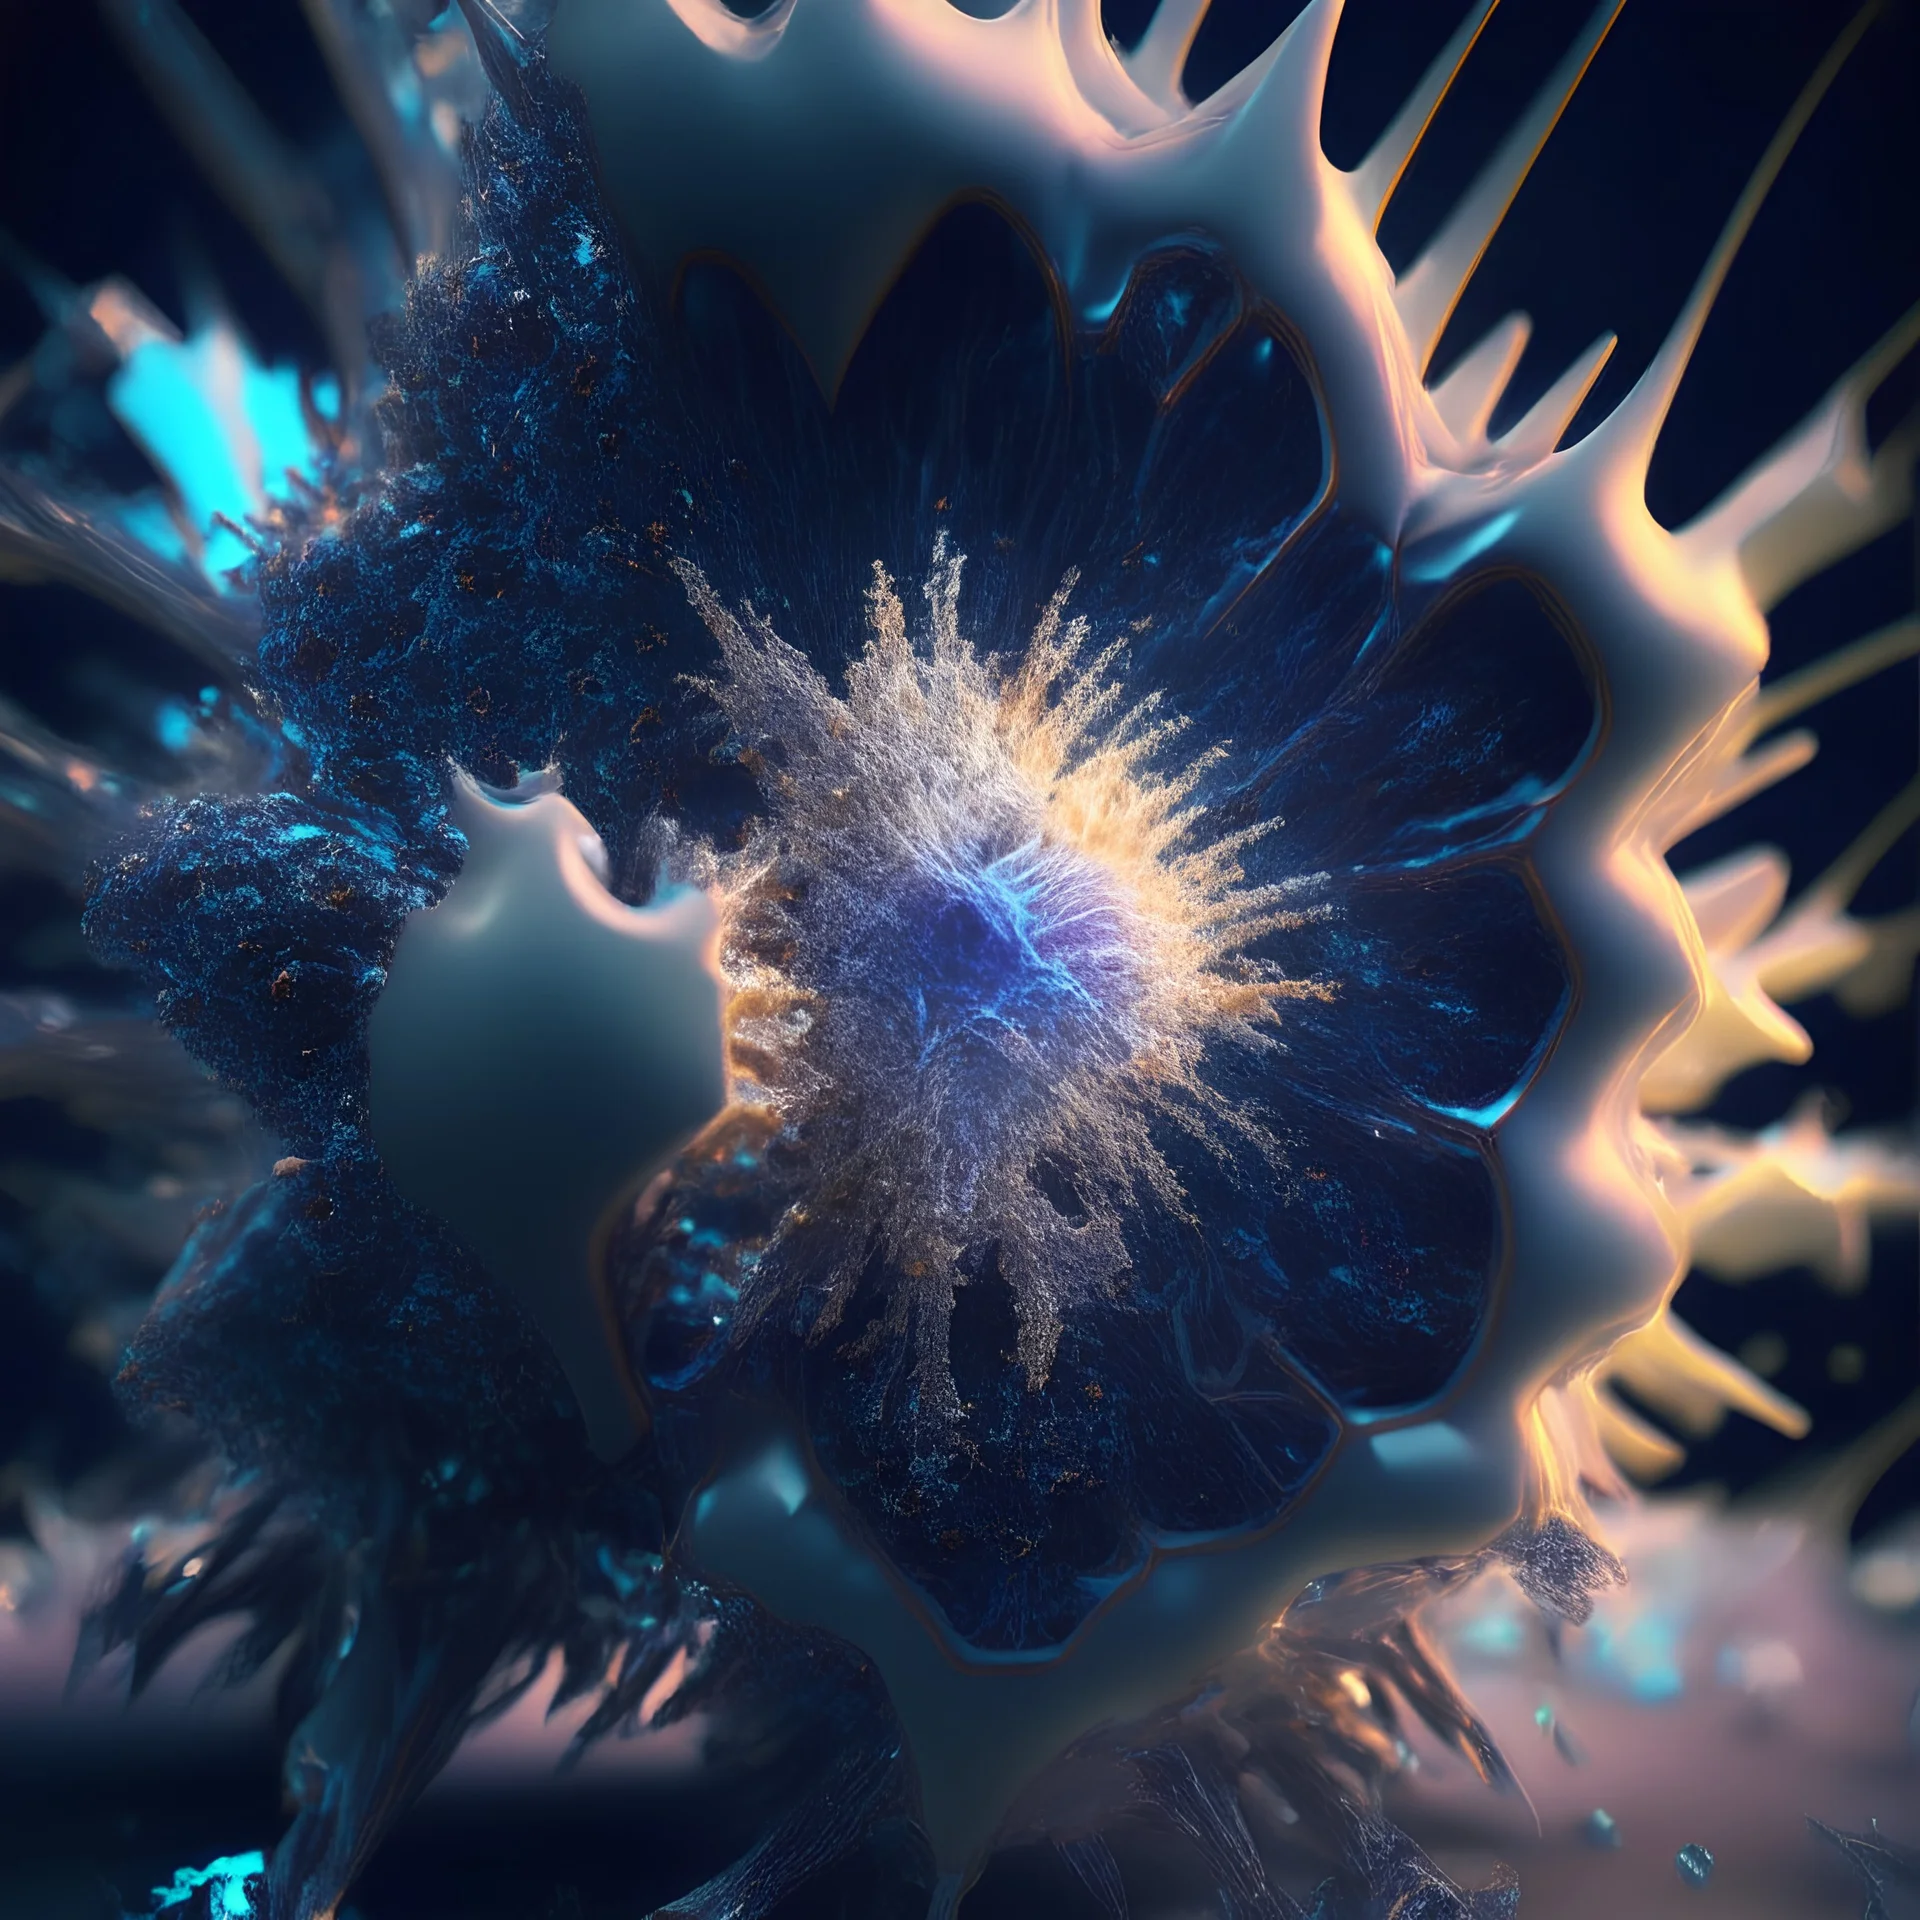 Neoblast as a type of genetic modification extends lifespan beyond normal human limits. 64K scifi, science art, unreal render, cryengine render, bryce3d fractal render, realistic illustration global illumination, canon eos r 3 fujifilm x - t 3 0 sony alpha, rigid shattered dichromatic fractal wave shard glitch volumetric dynamic fractal wave simulation lighting impressive masterpiece hyper ultra detailed intricate sharp focus